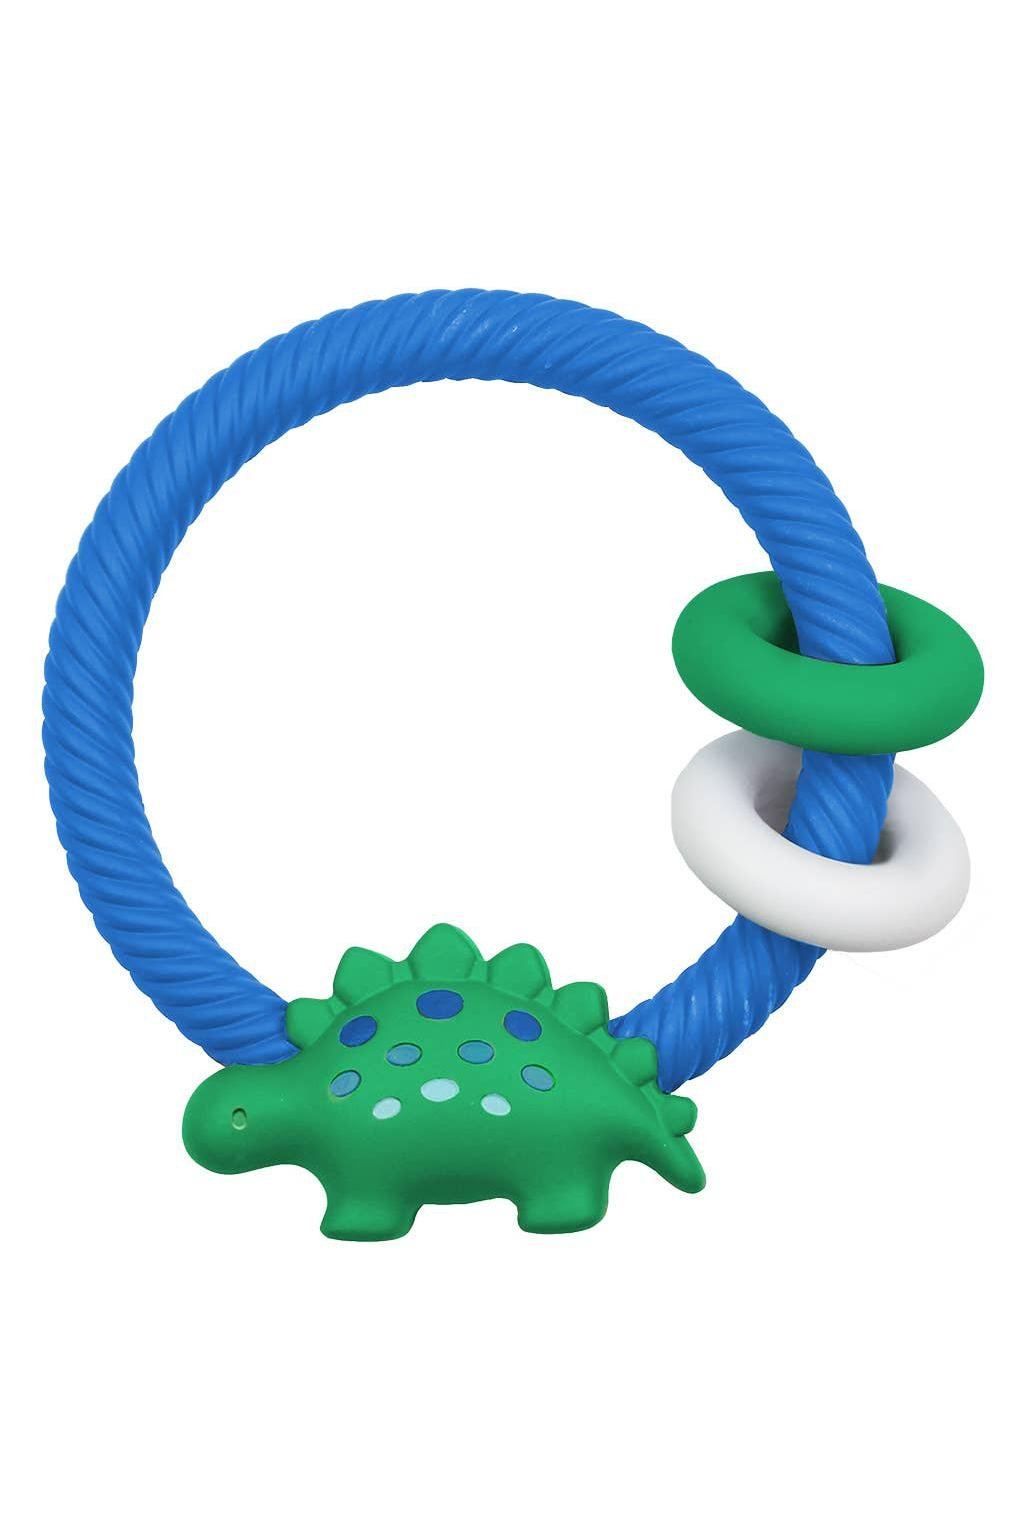 Dino Rattle Teether! - Tea for Three: A Children's Boutique-New Arrivals-Tea for Three: A Children's Boutique